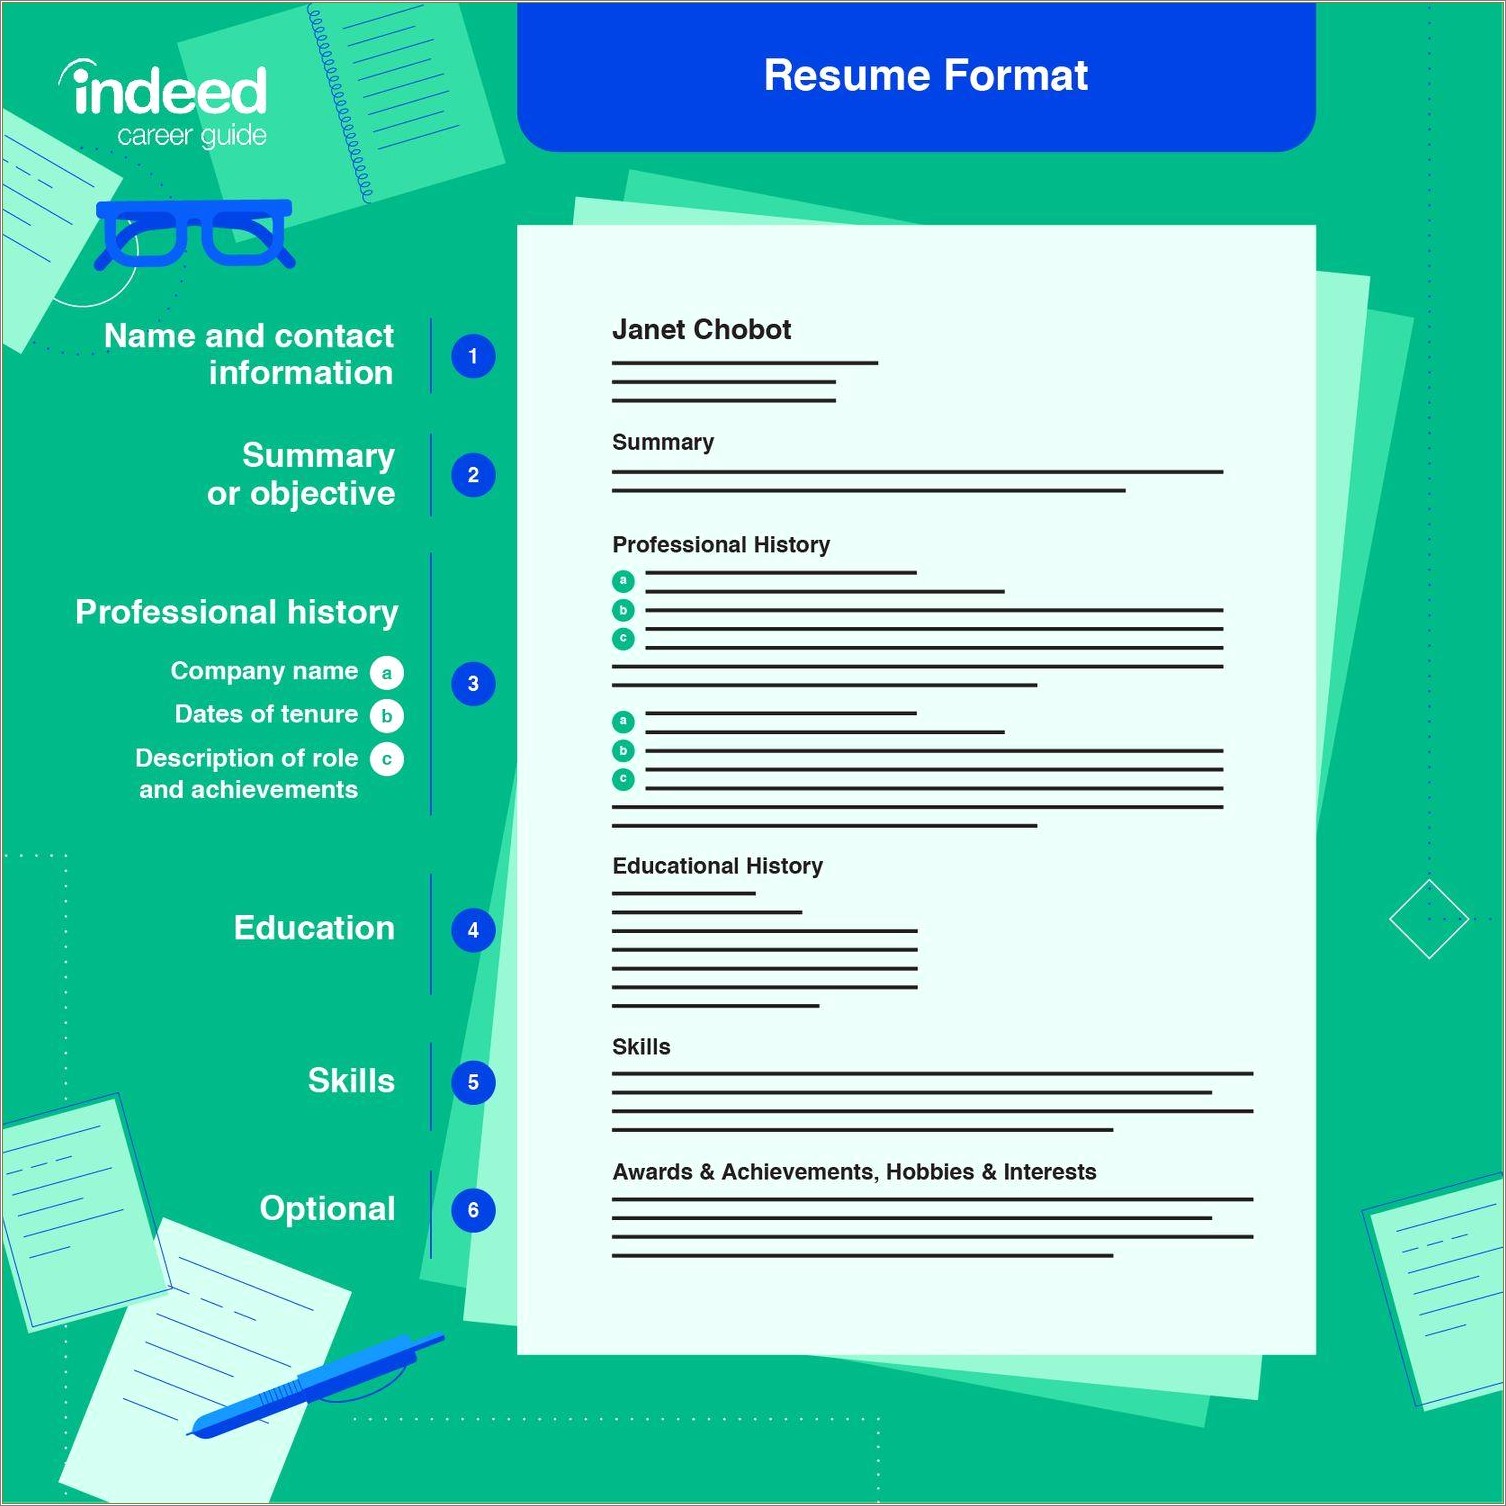 10 Tips For Writing A Good Resume